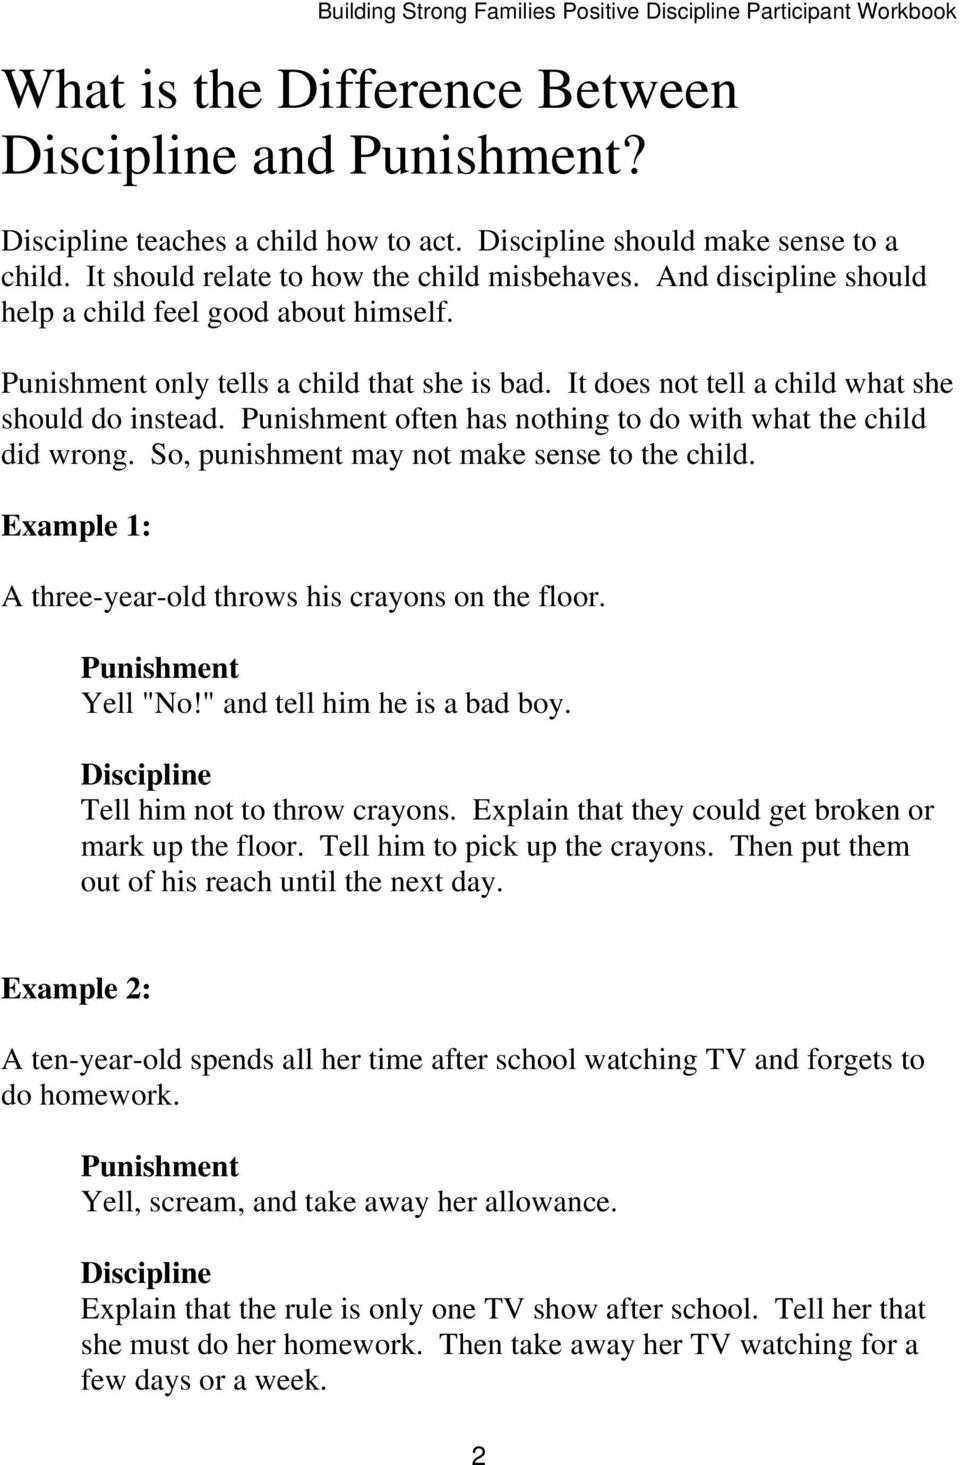 Punishment often has nothing to do with what the child did wrong. So, punishment may not make sense to the child. Example 1: A three-year-old throws his crayons on the floor. Punishment Yell "No!